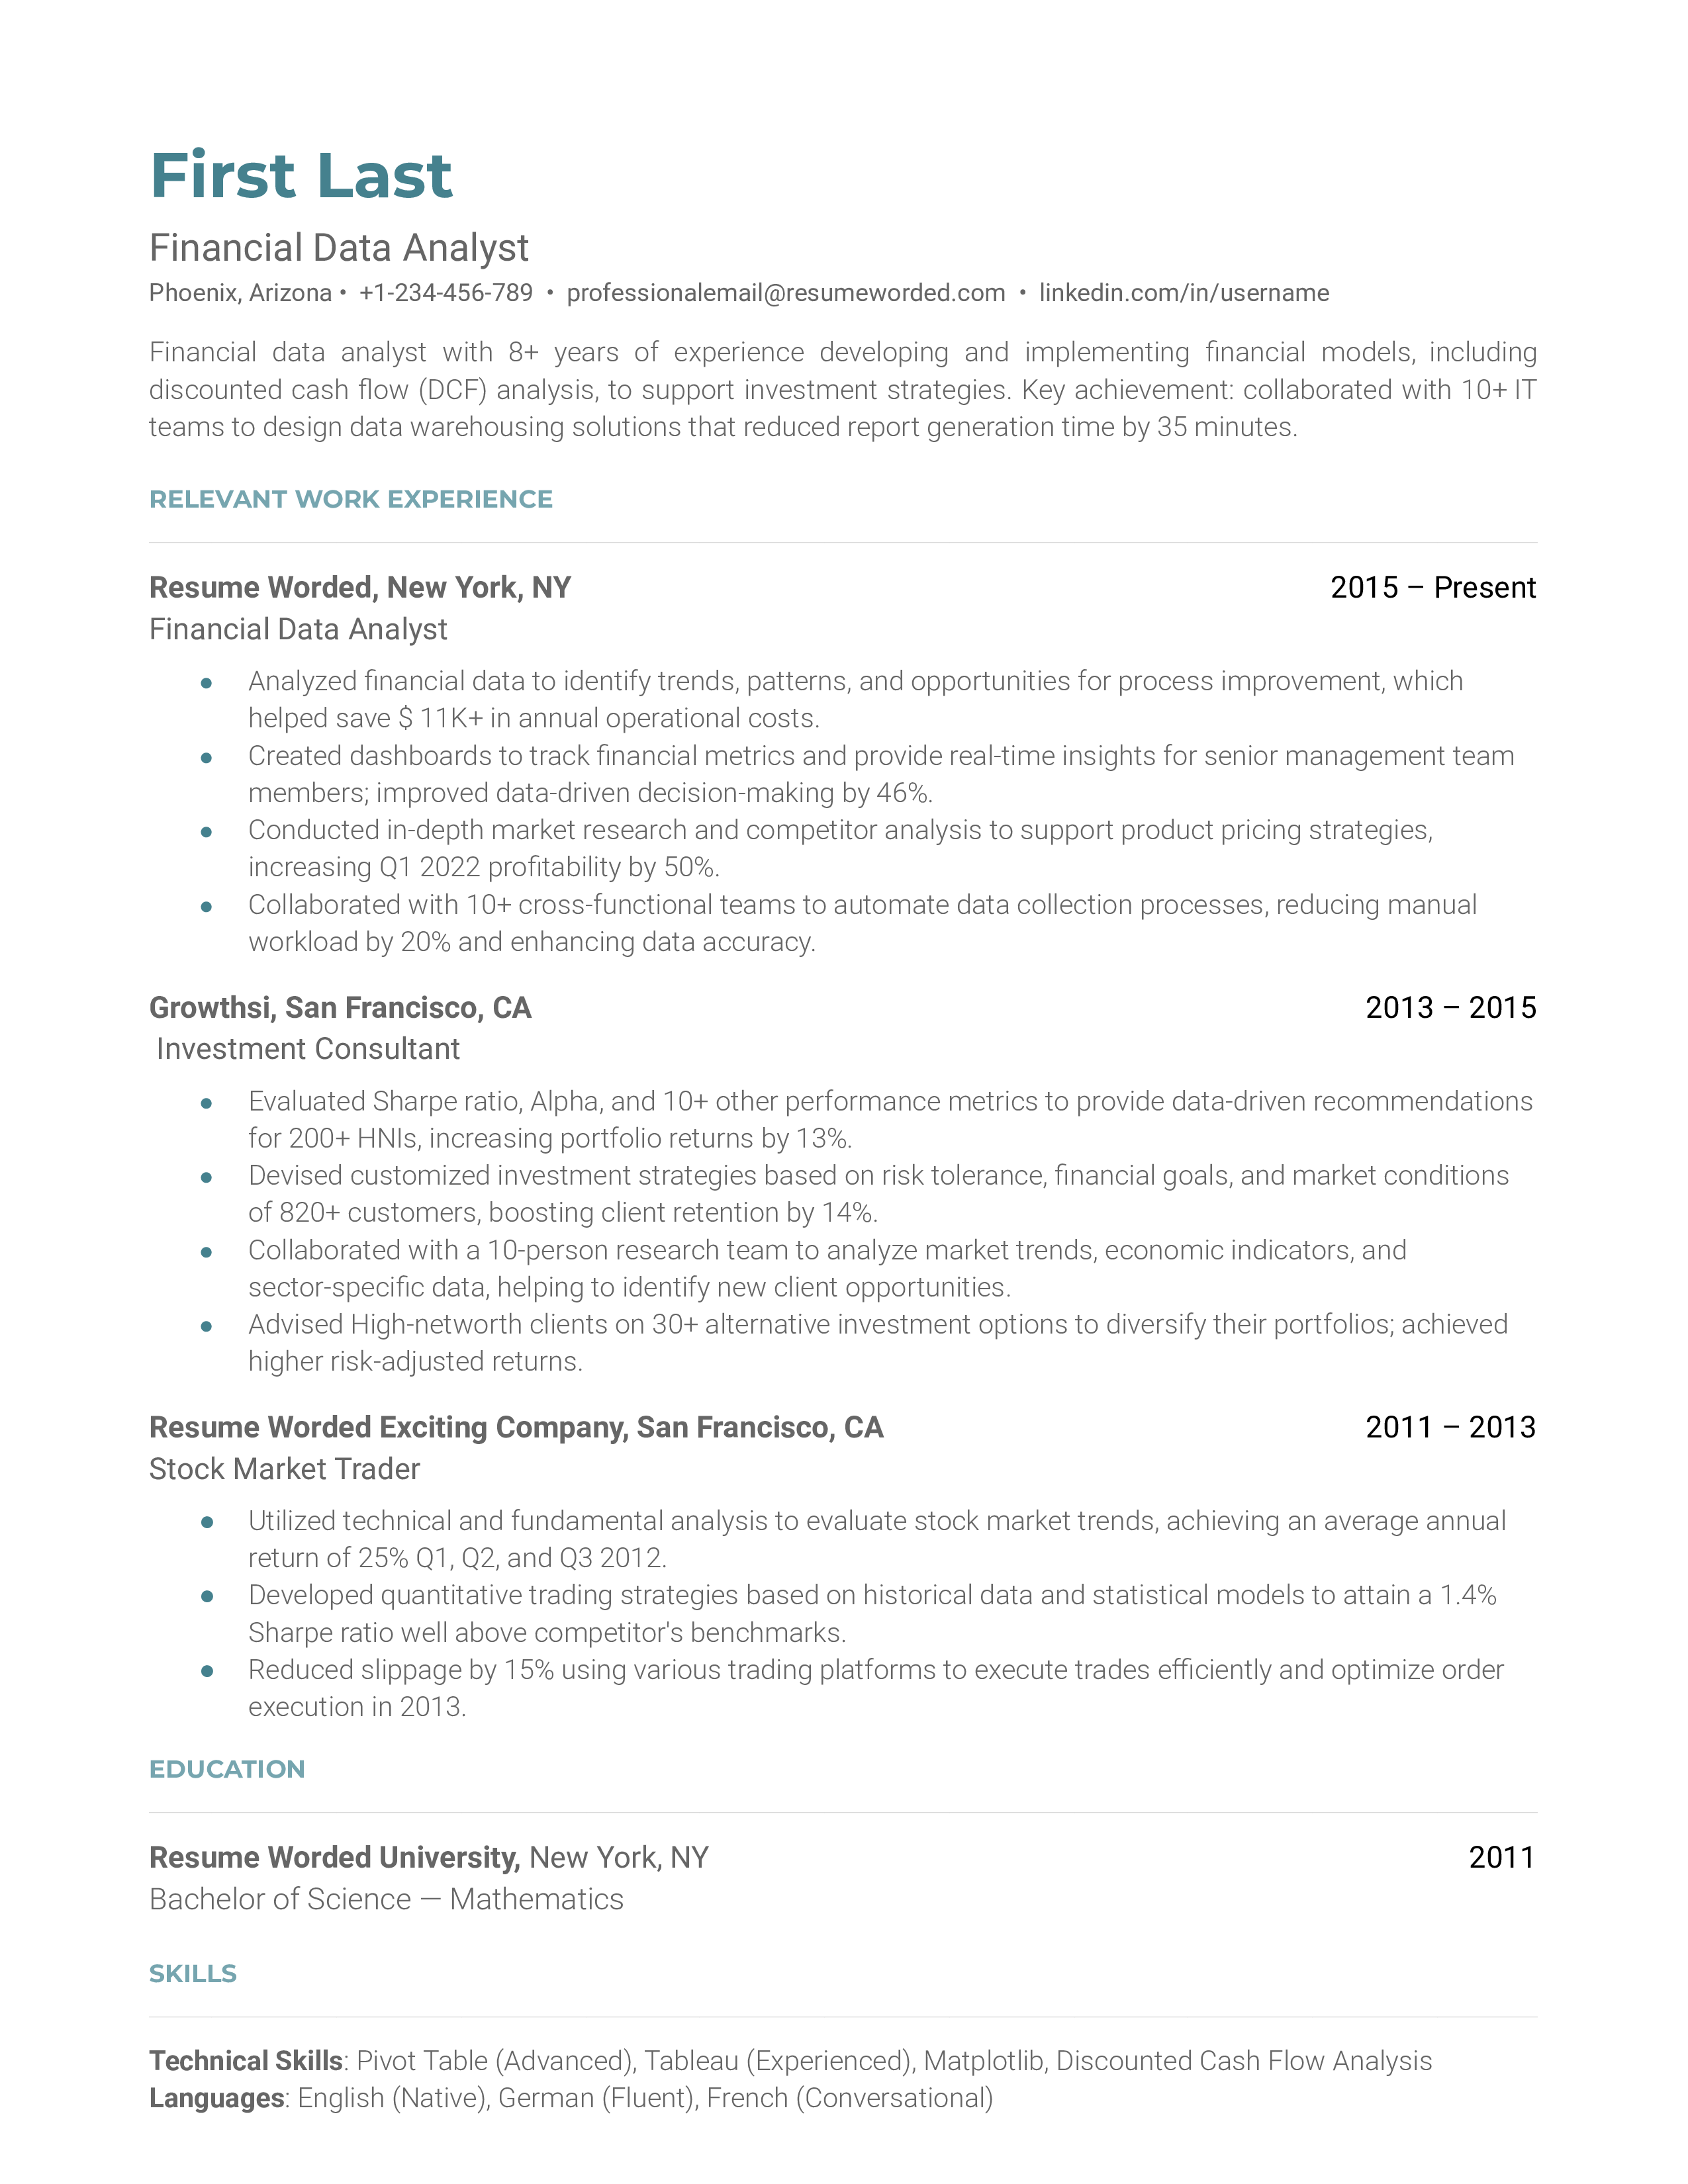 Financial Data Analyst CV detailing proficiency in data tools and project experience.